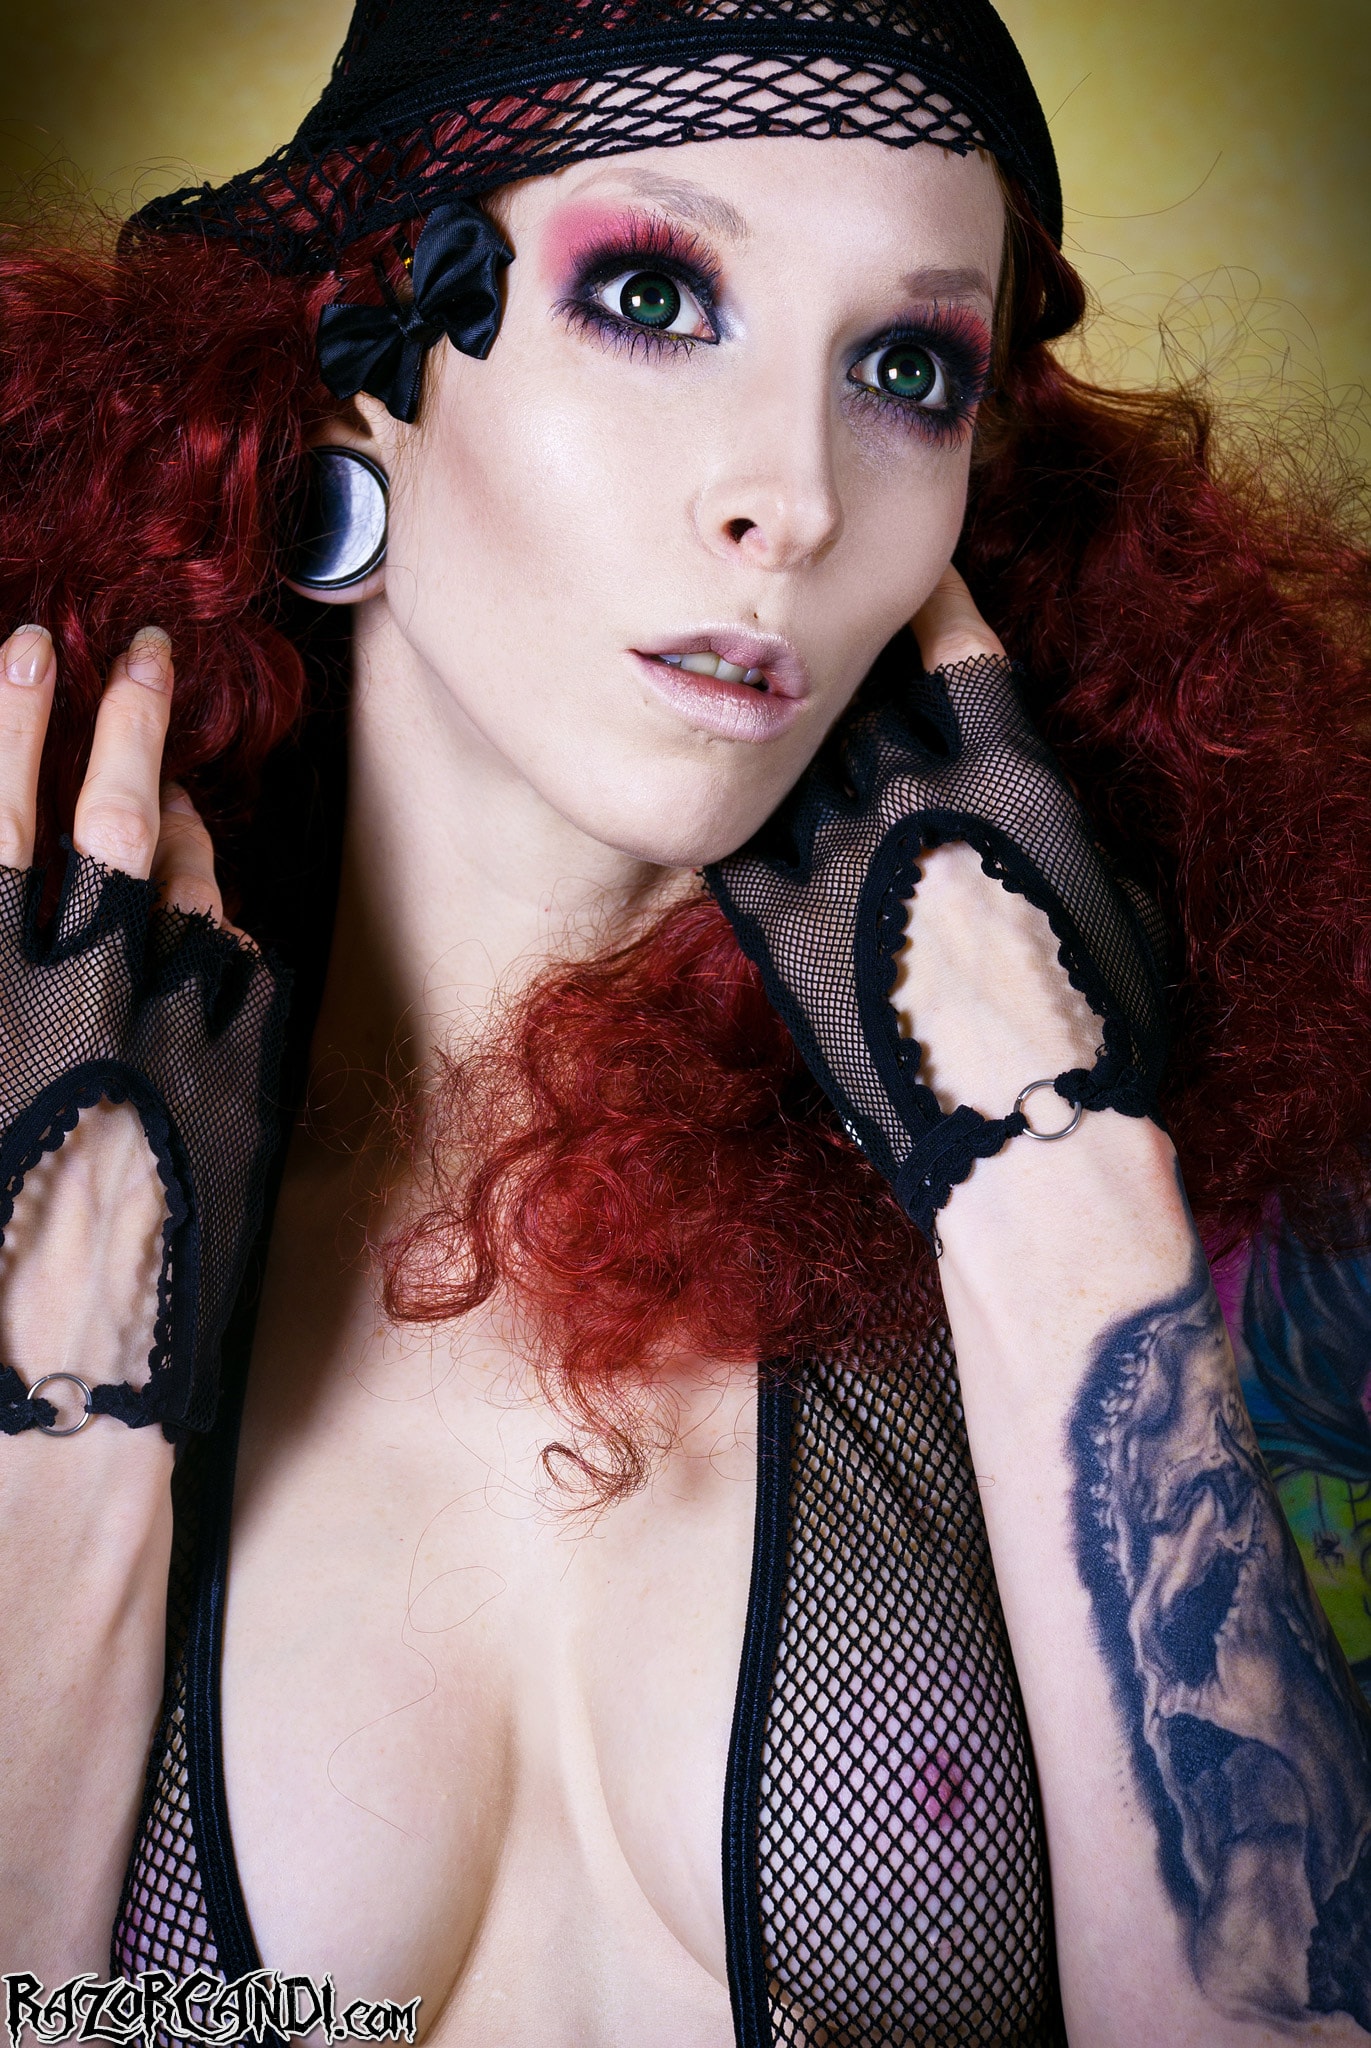 Razor Candi - Busty Tattooed Razor Candi with Big Curly Red Hair | Picture (3)